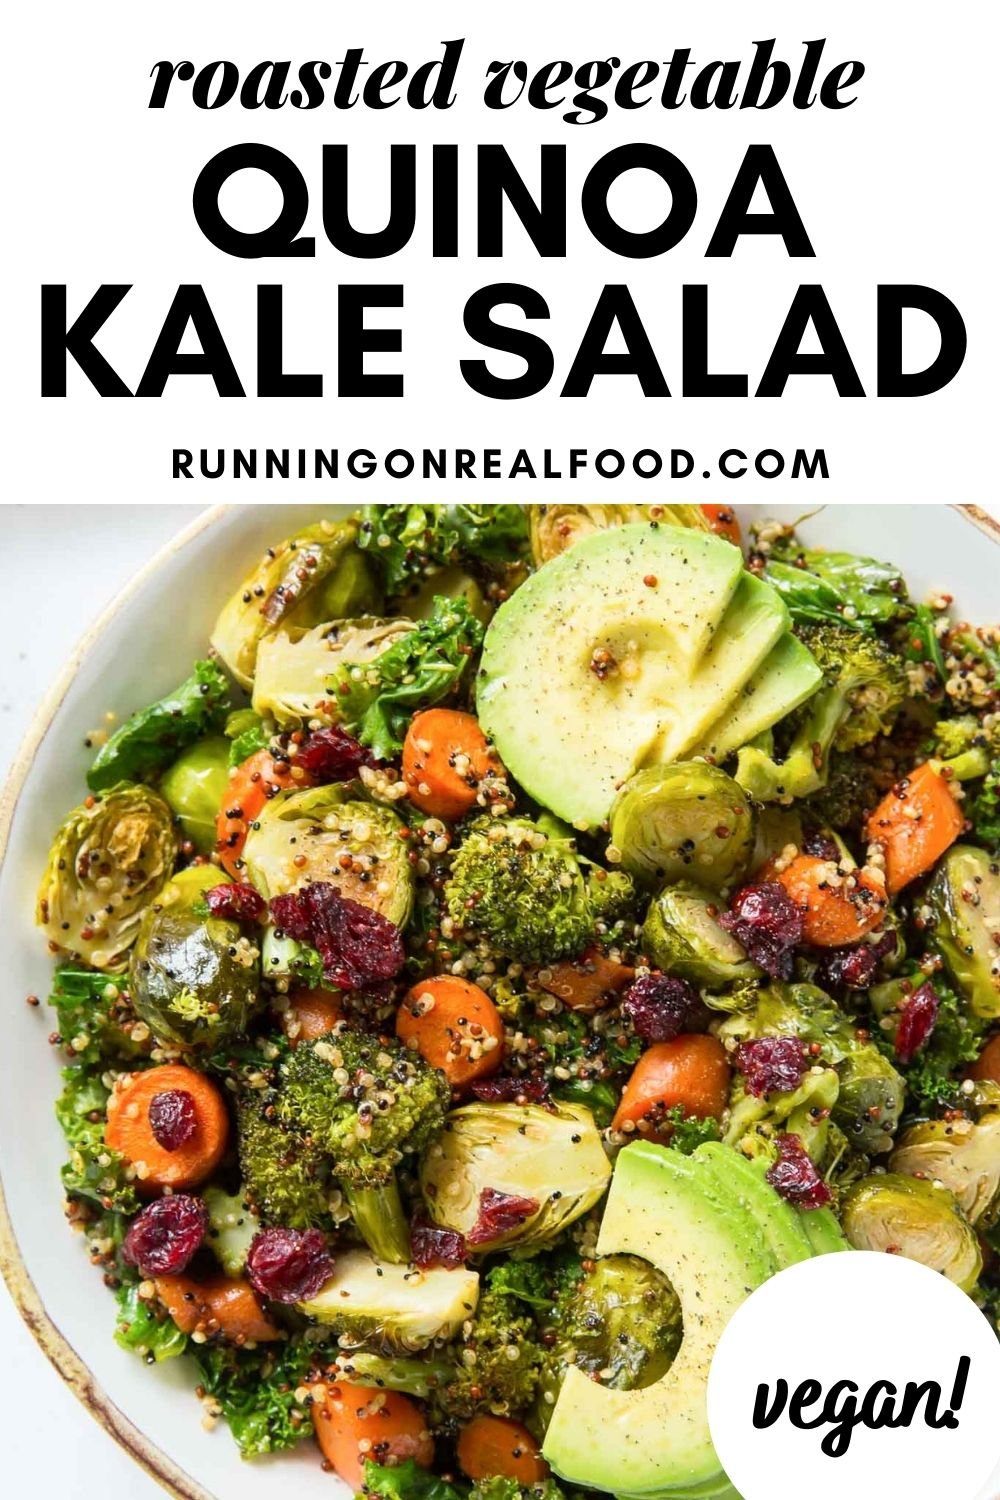 Quinoa Kale Salad with Roasted Vegetables - Running on Real Food